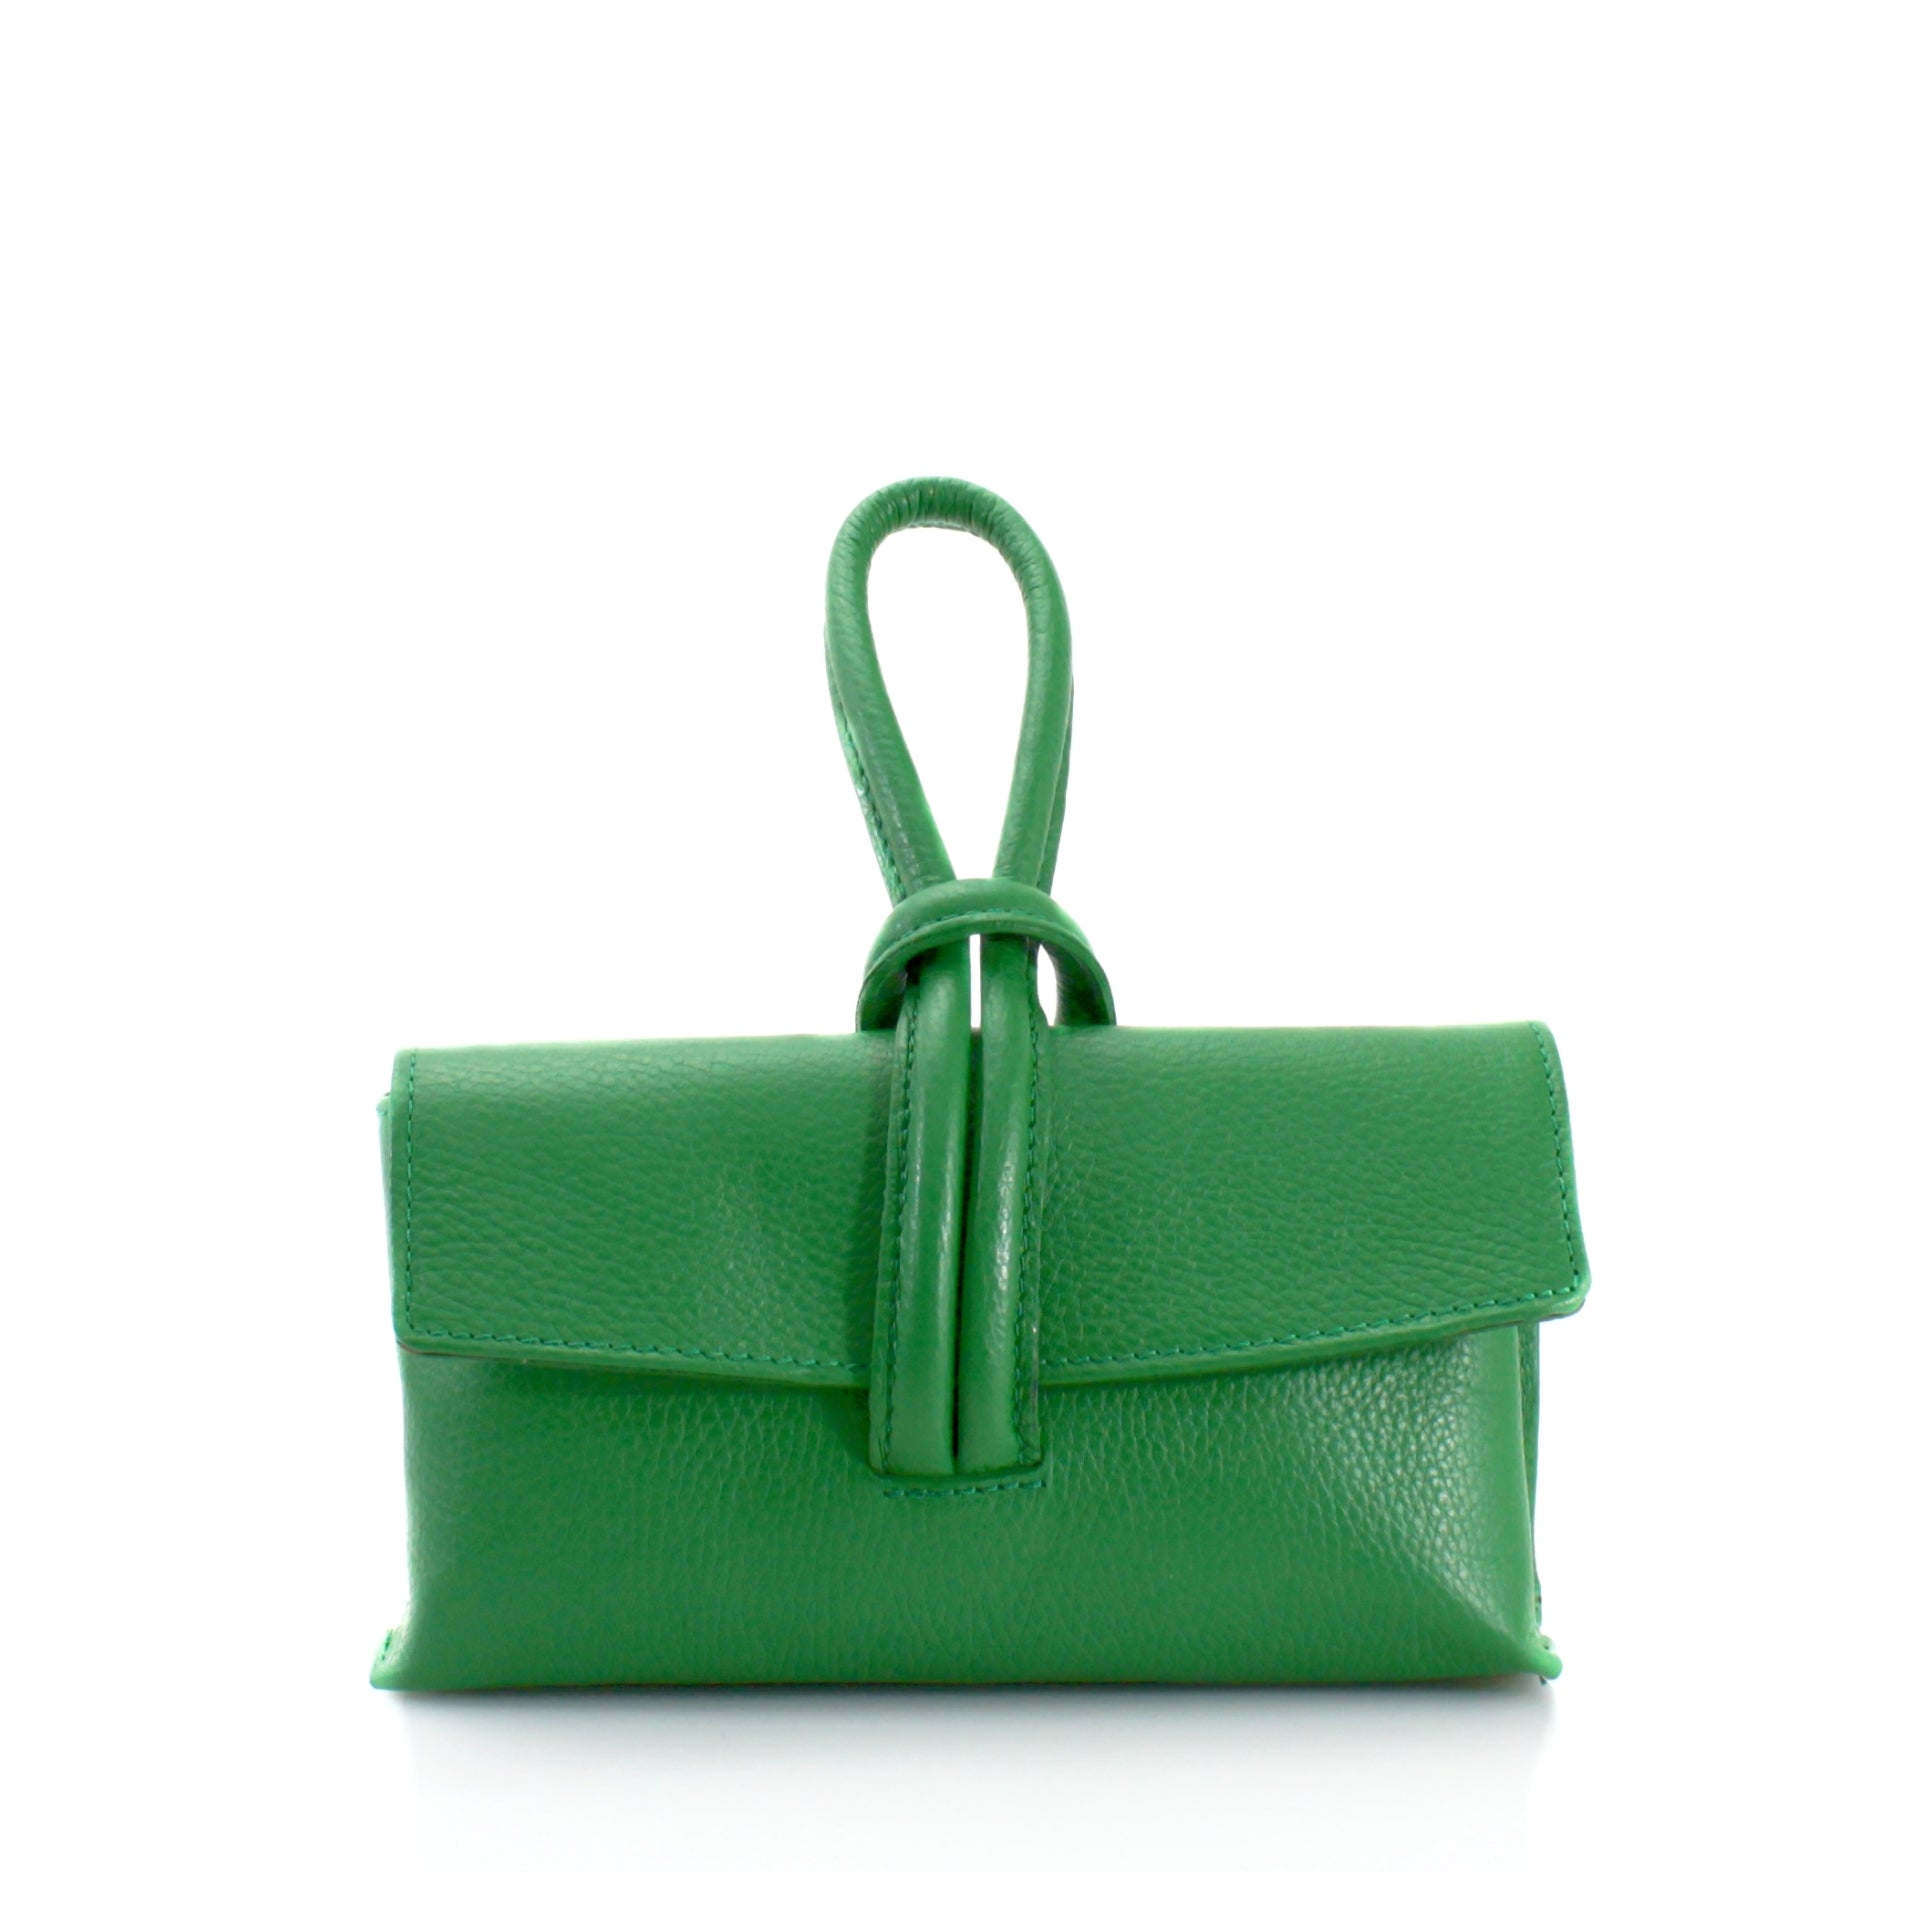 Chic & Sassy Green Leather Clutch Bag